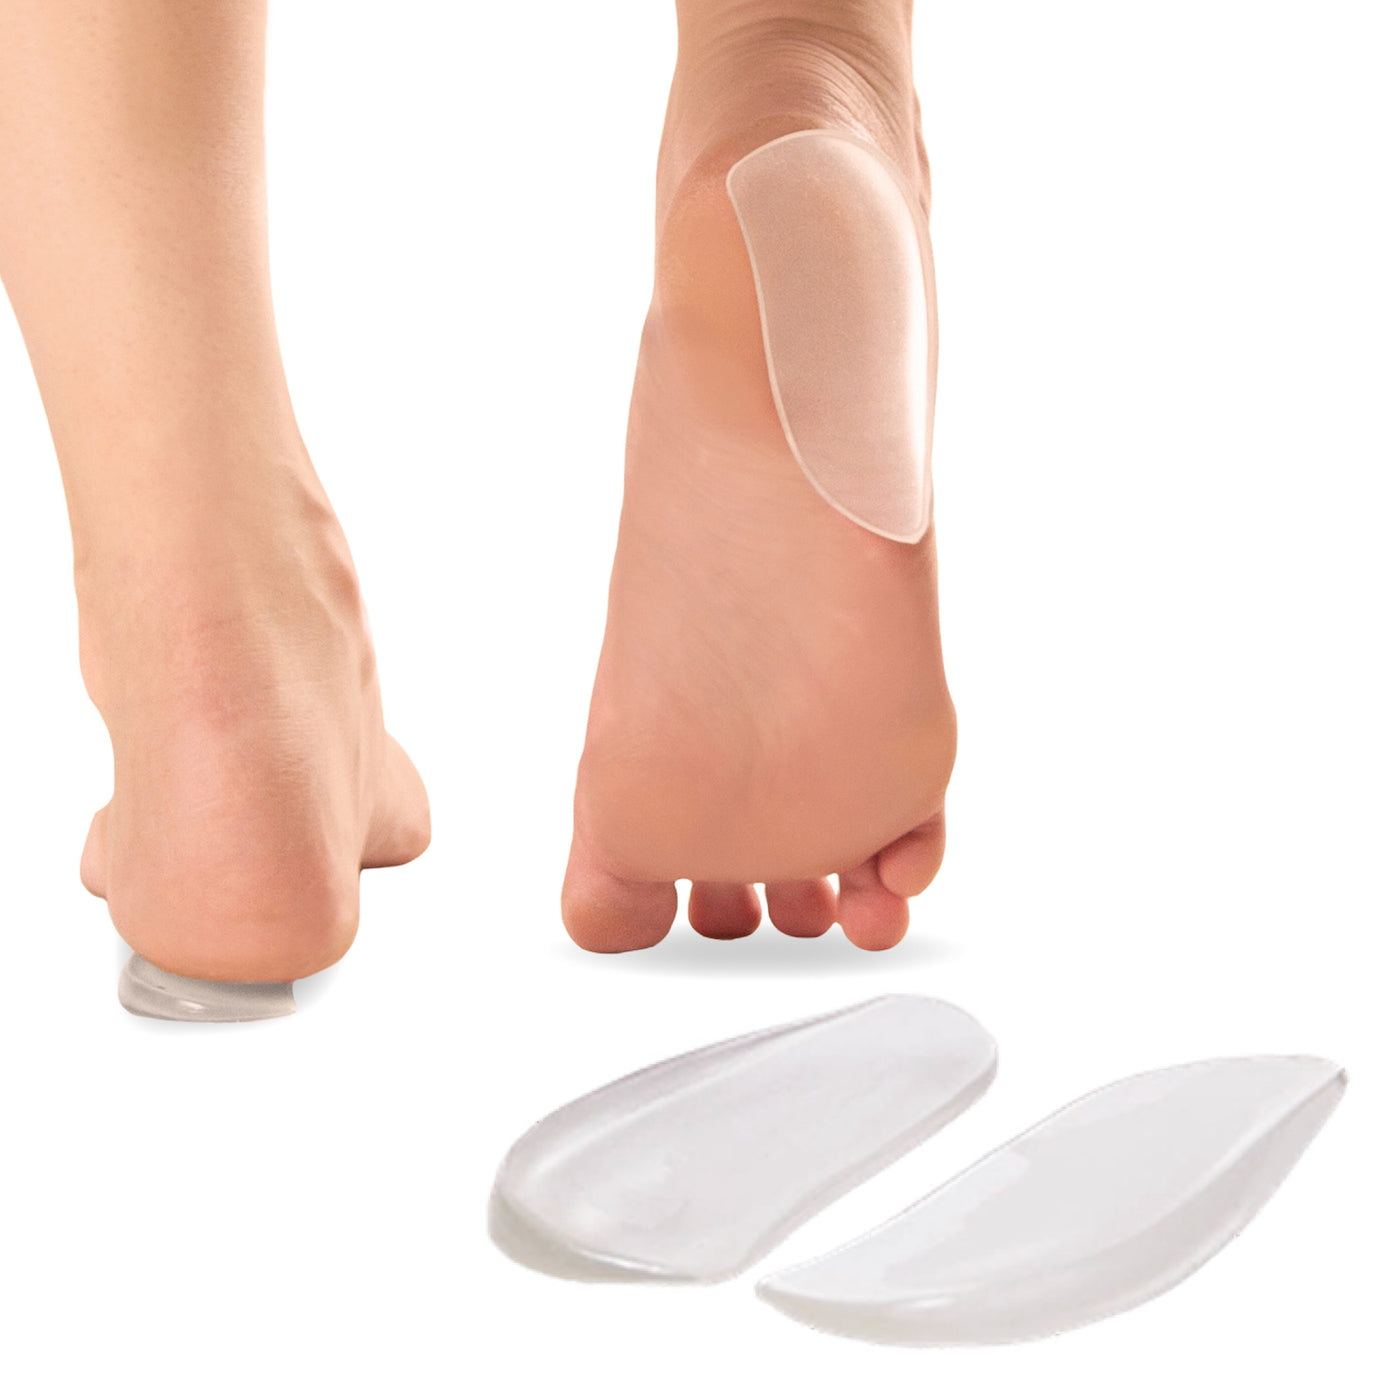 What Are The Side Effects Of Wearing Insoles? - MASS4D® Foot Orthotics